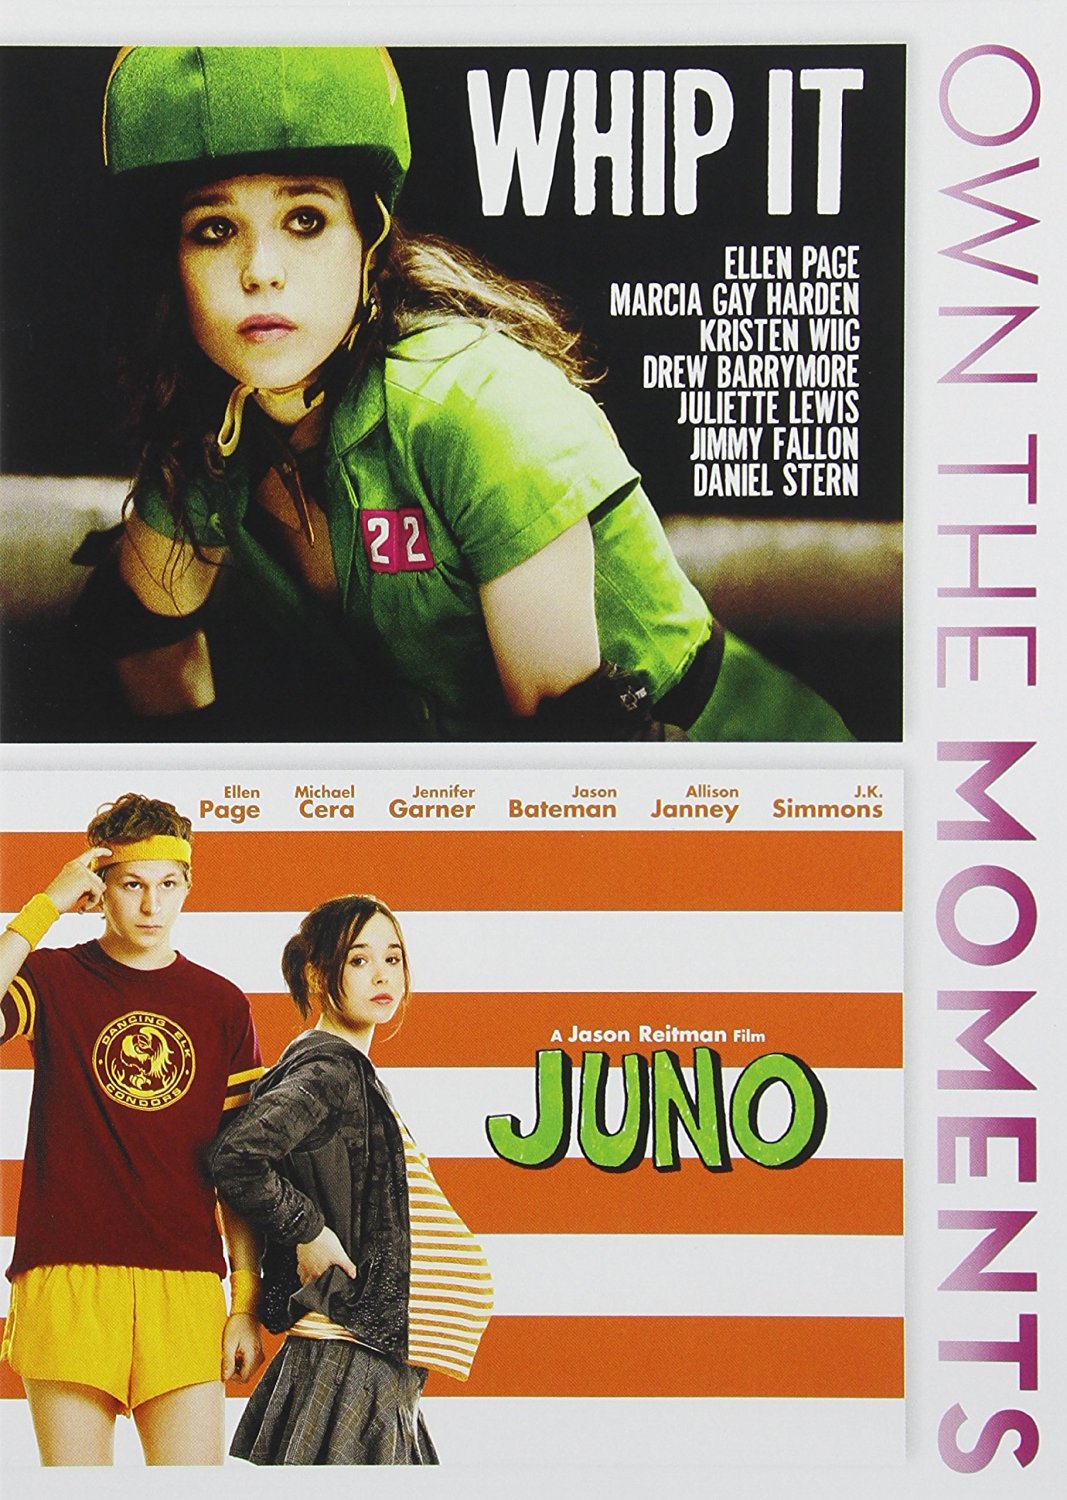 Whip it & Juno